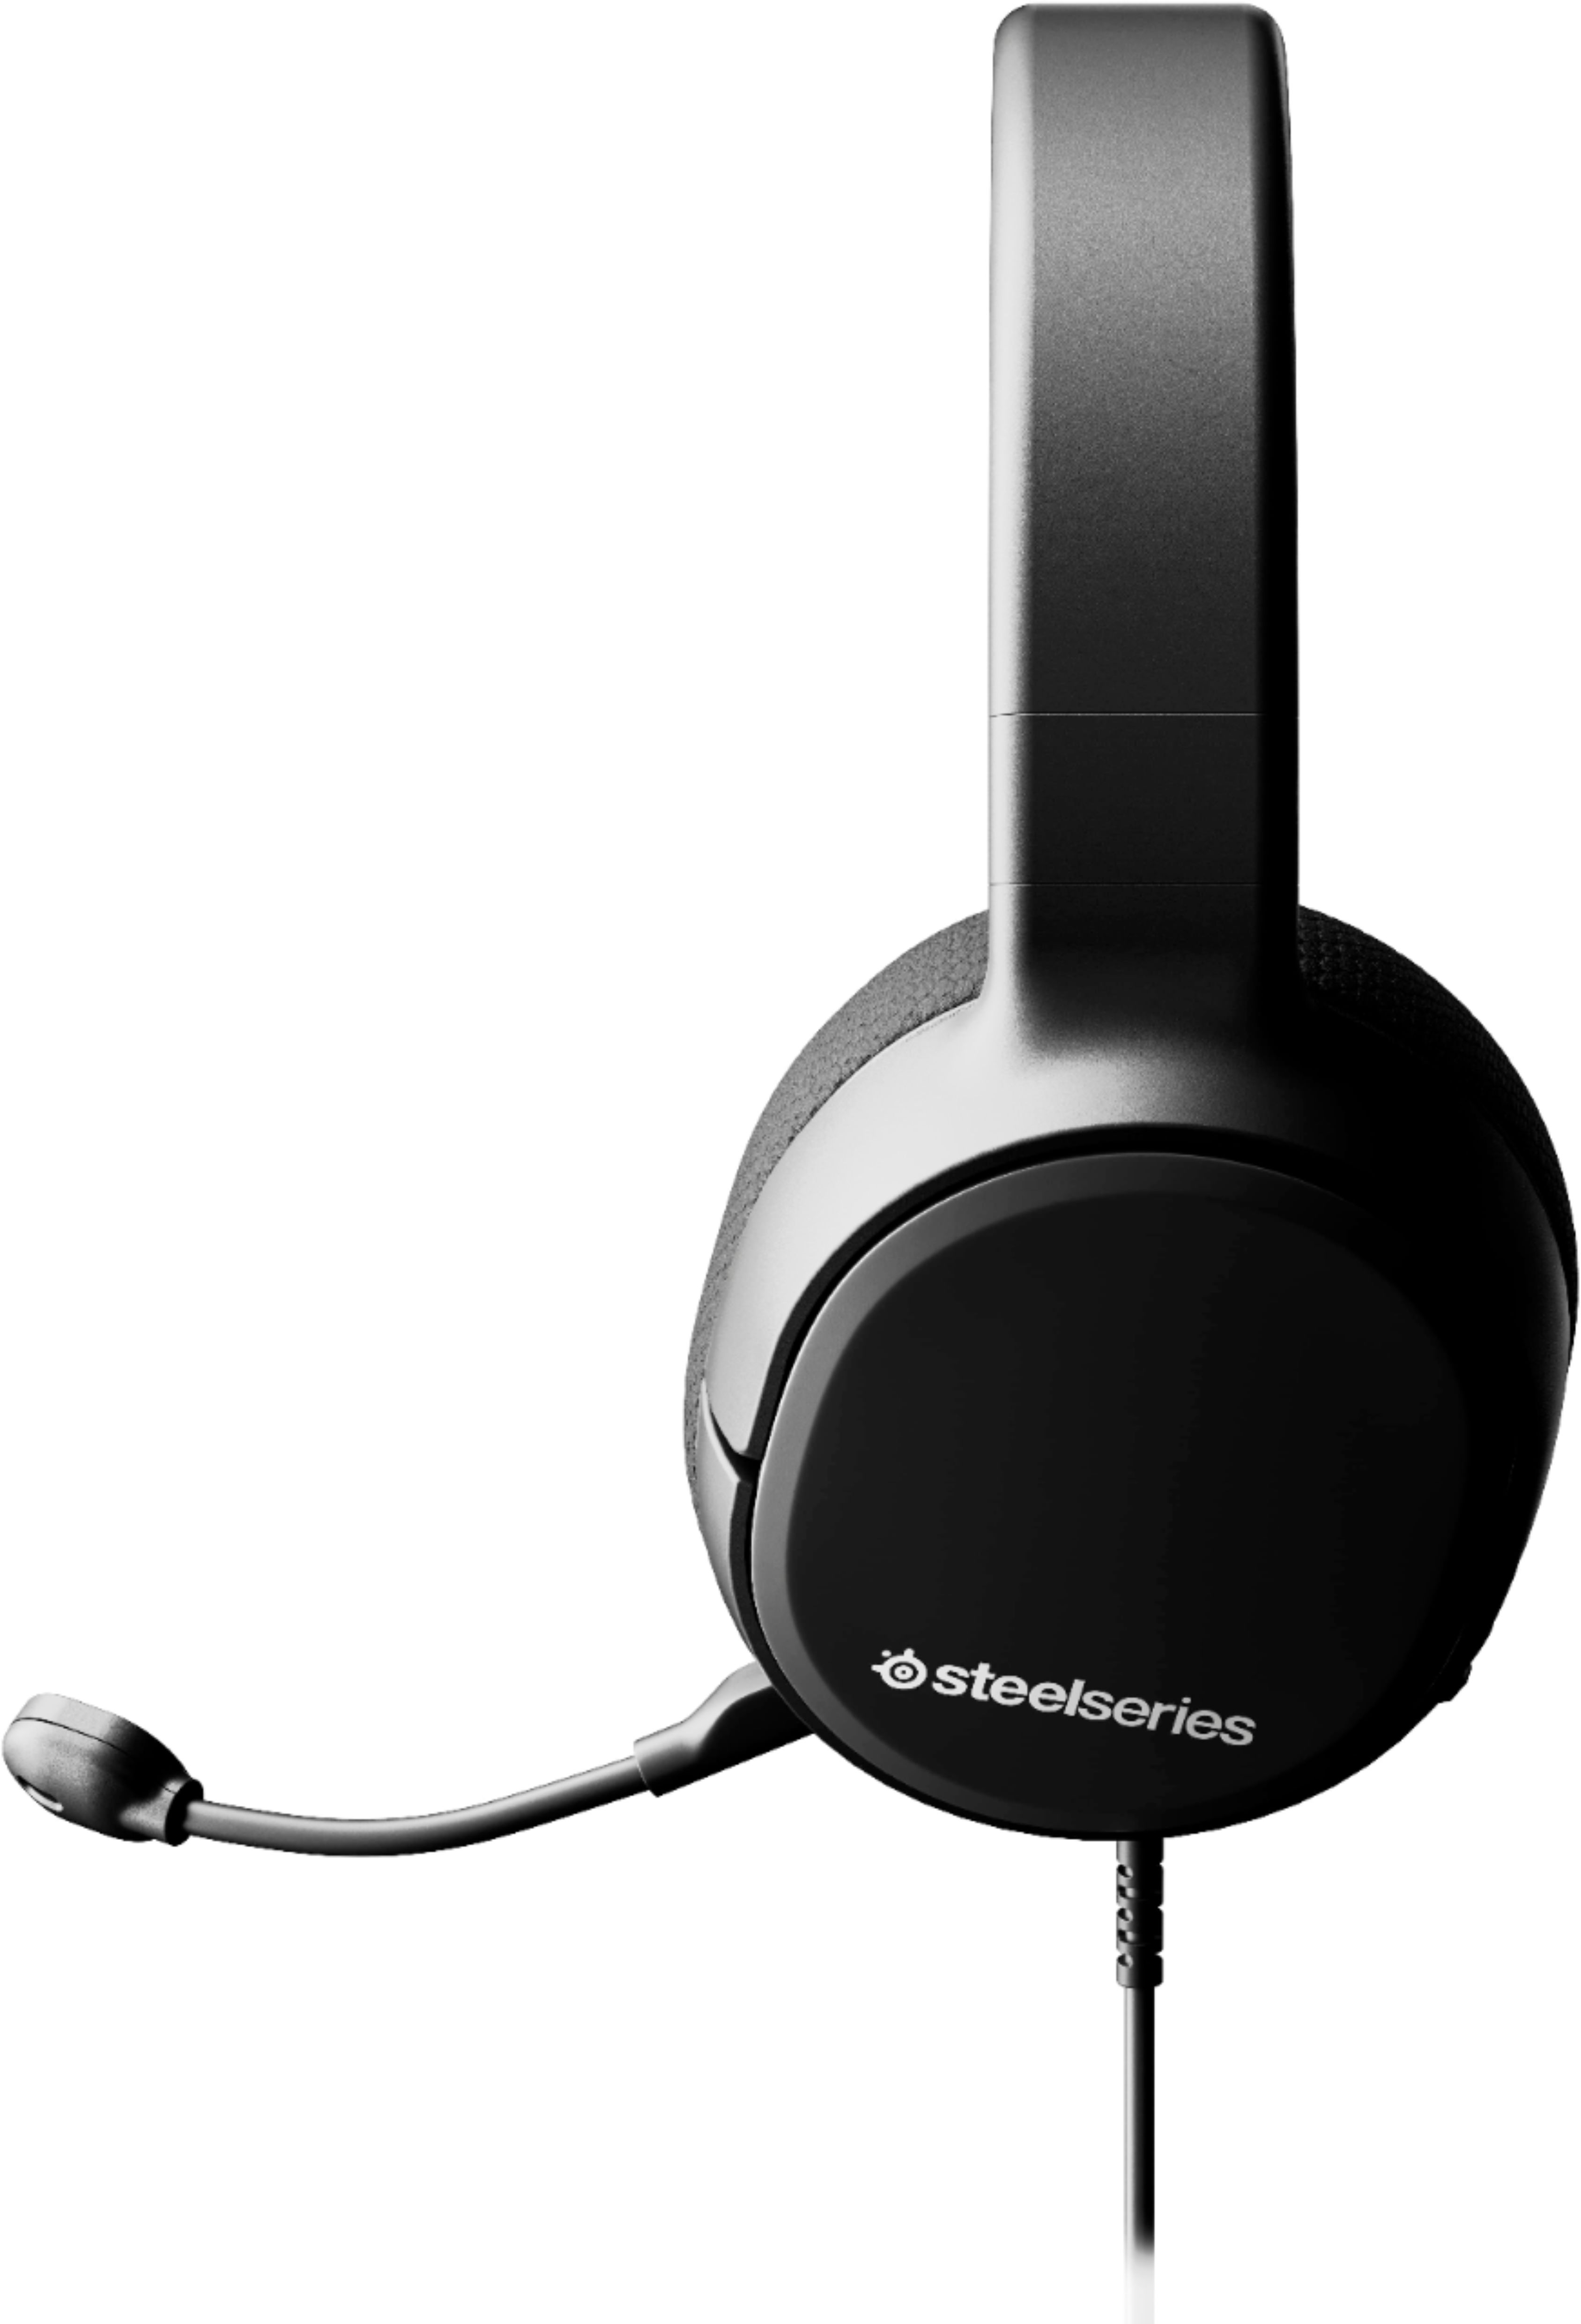 Left View: SteelSeries - Arctis 1 Wired Stereo Gaming Headset for PC - Black